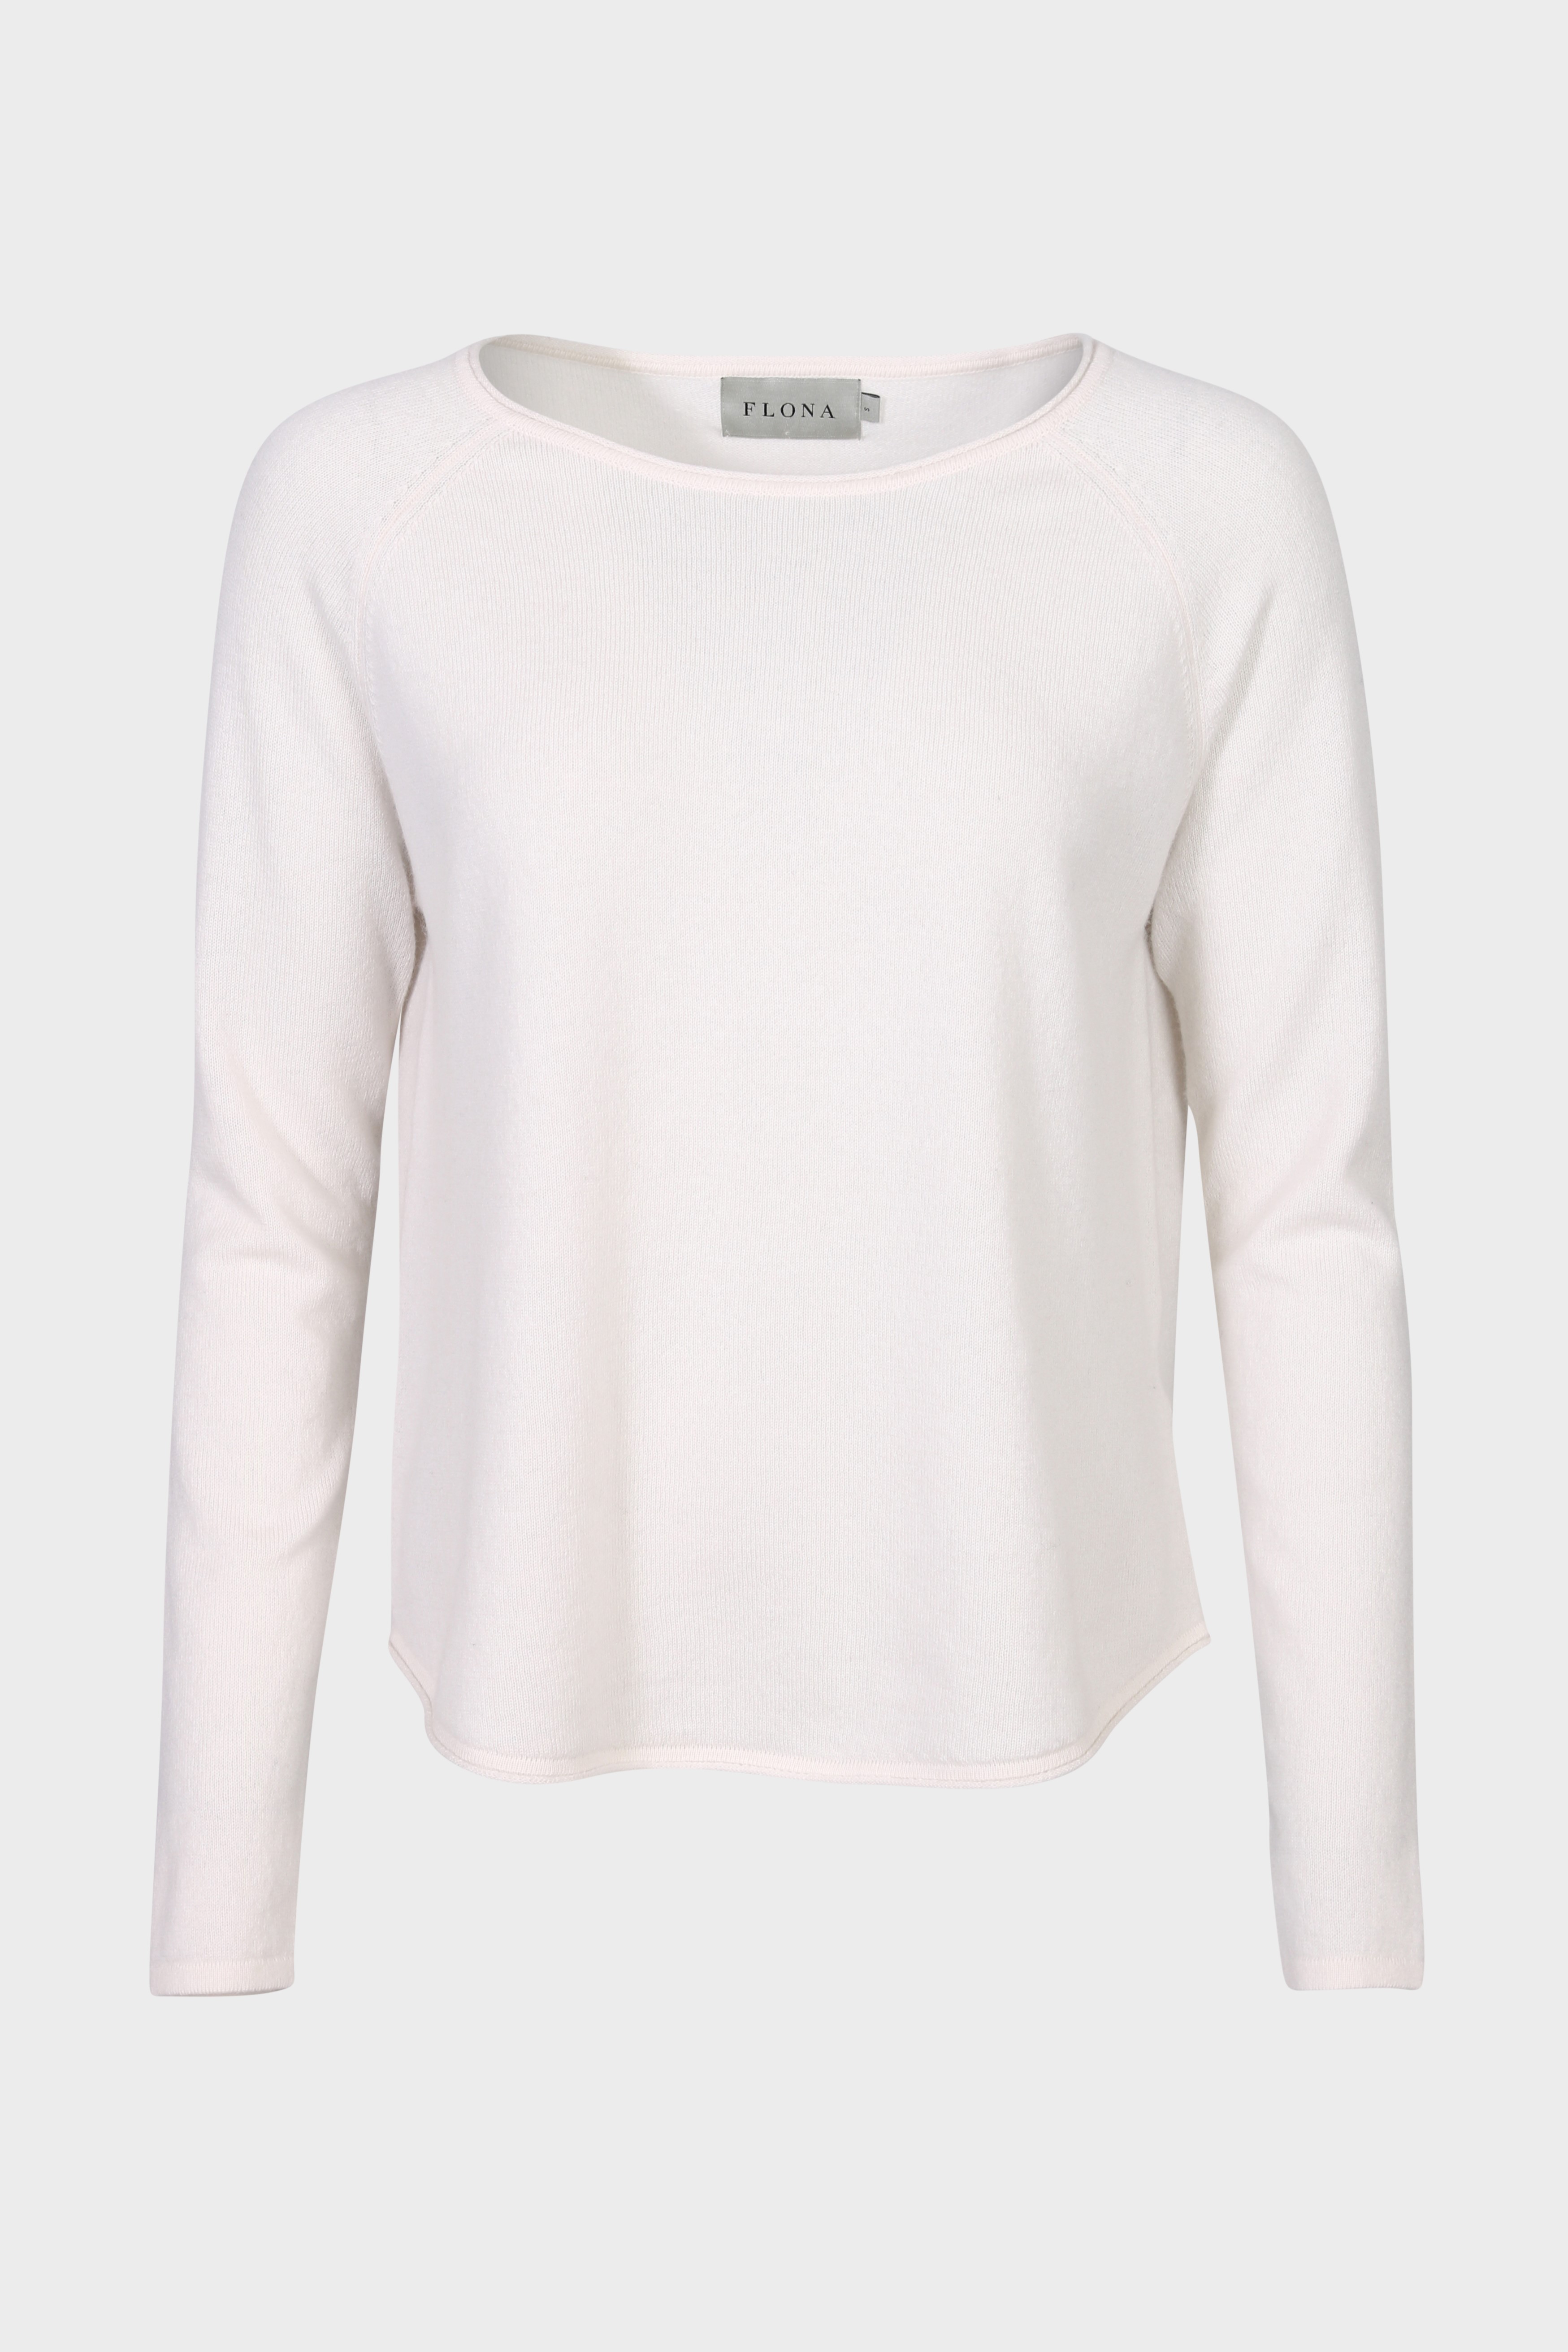 FLONA Cashmere Sweater in Offwhite XL